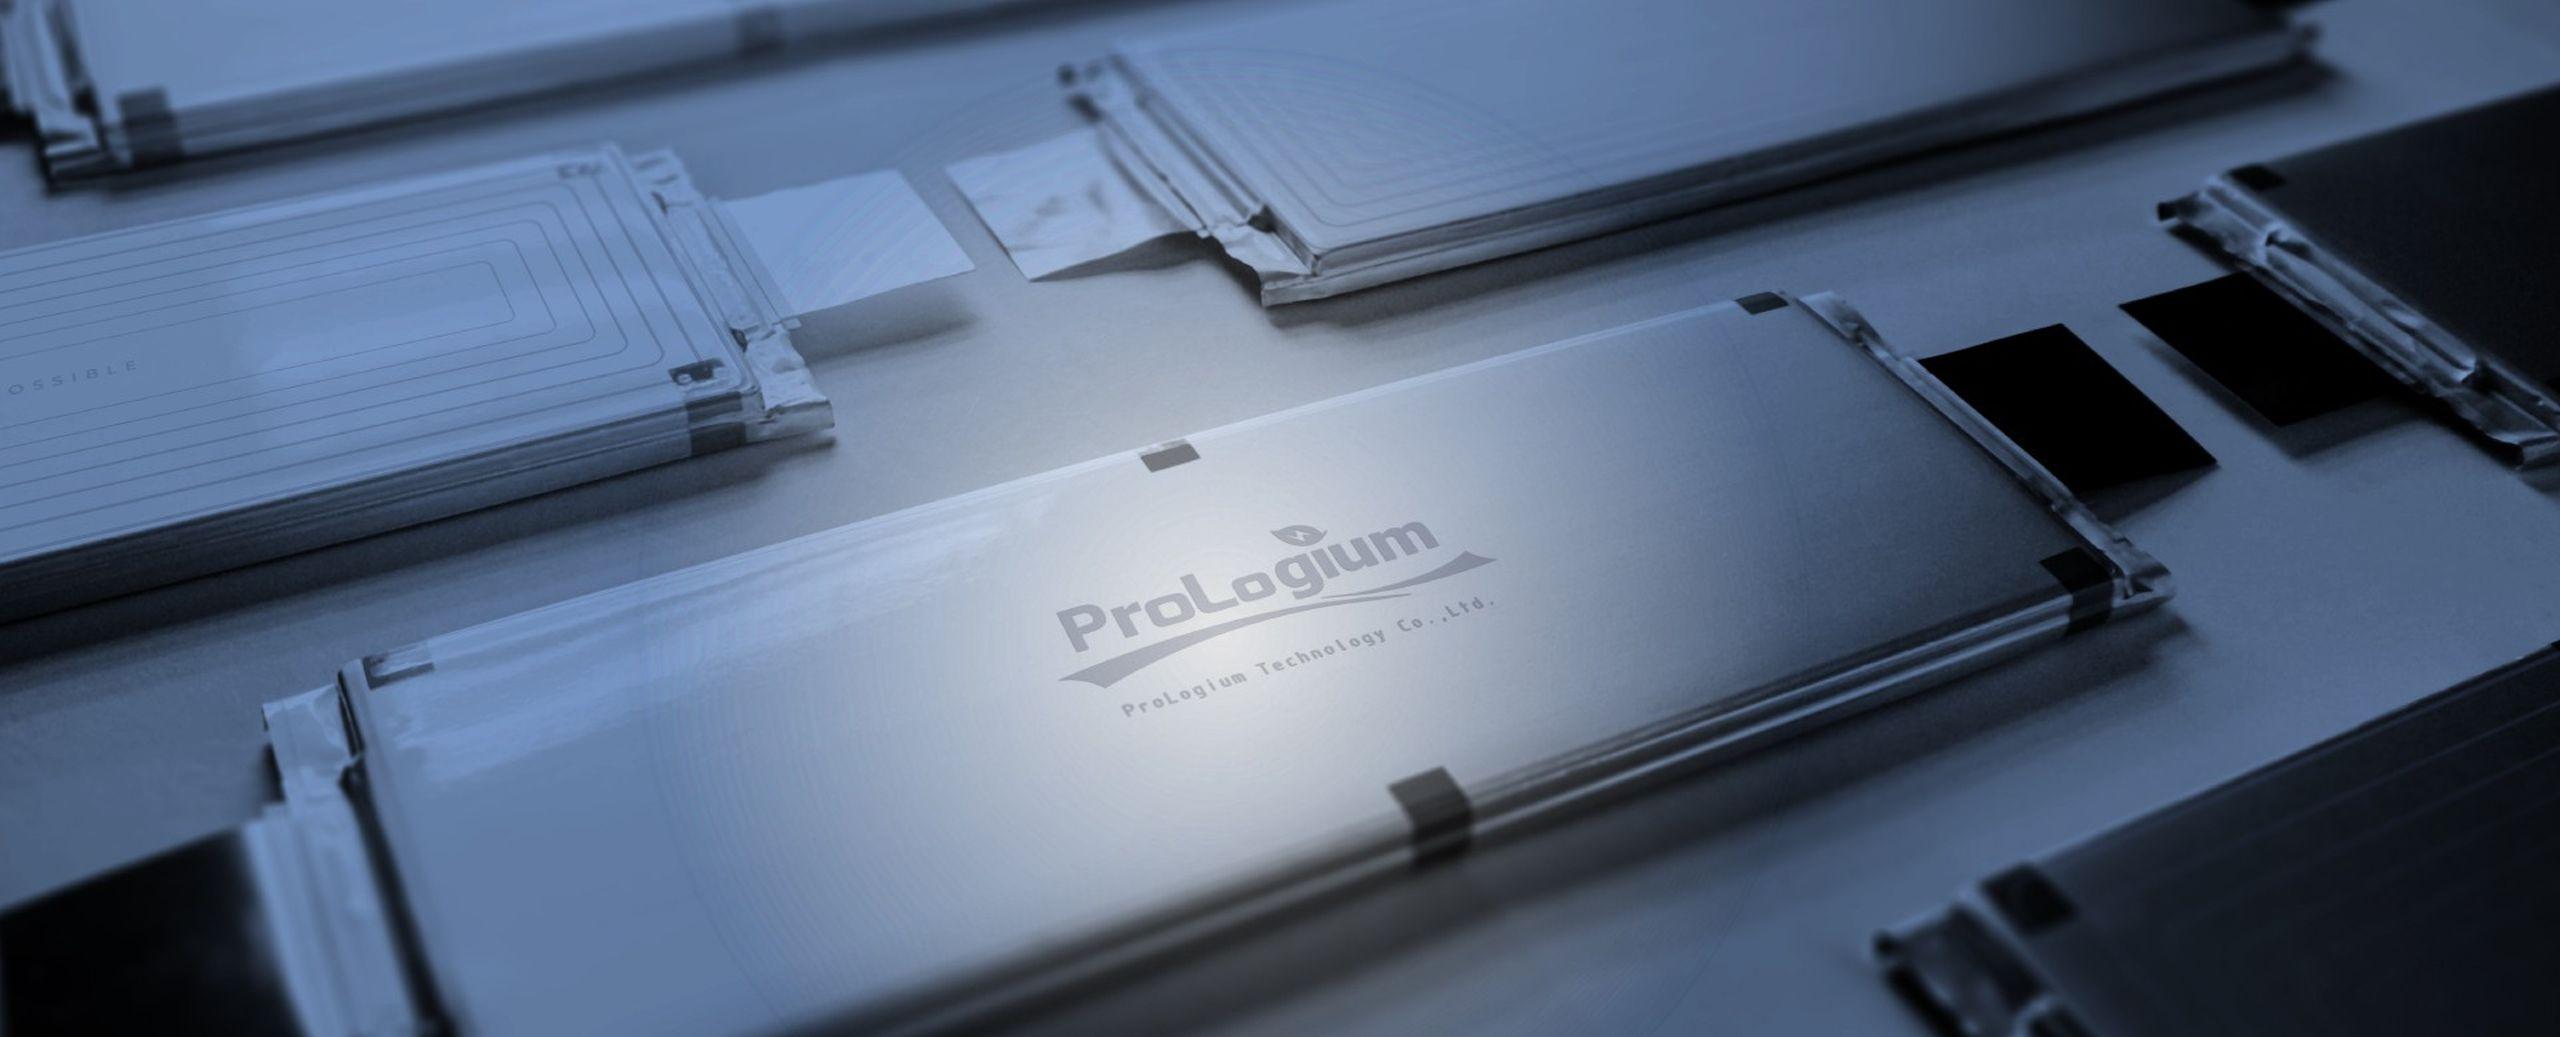 prologium-battery-cel-solid-state